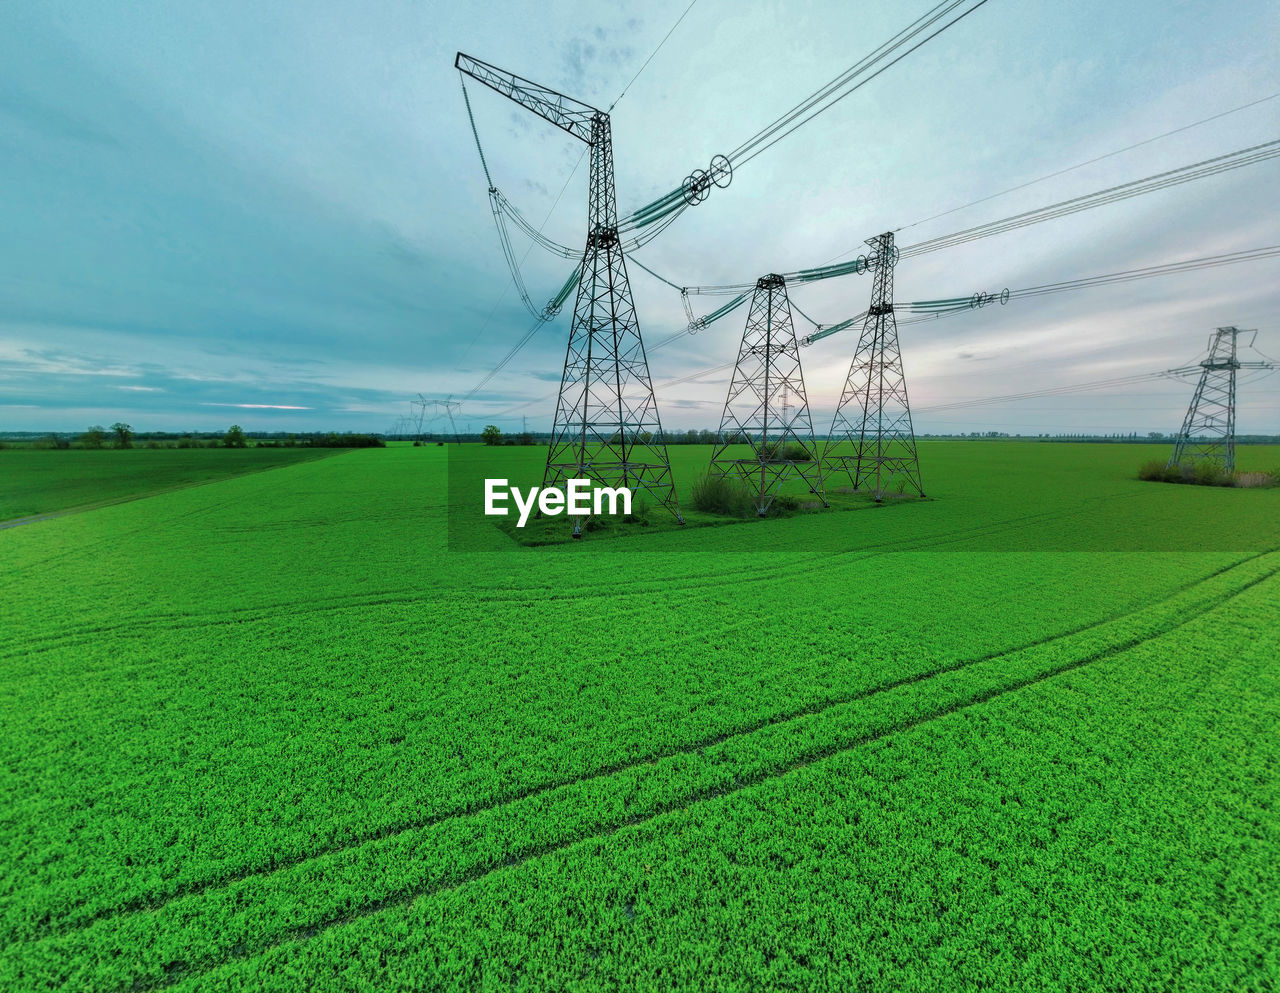 environment, landscape, green, sky, agriculture, field, land, nature, electricity, power generation, technology, rural scene, grassland, cable, plant, grass, environmental conservation, no people, power supply, plain, crop, scenics - nature, cloud, beauty in nature, electricity pylon, outdoors, wind, farm, day, tranquility, growth, power line, social issues, architecture, renewable energy